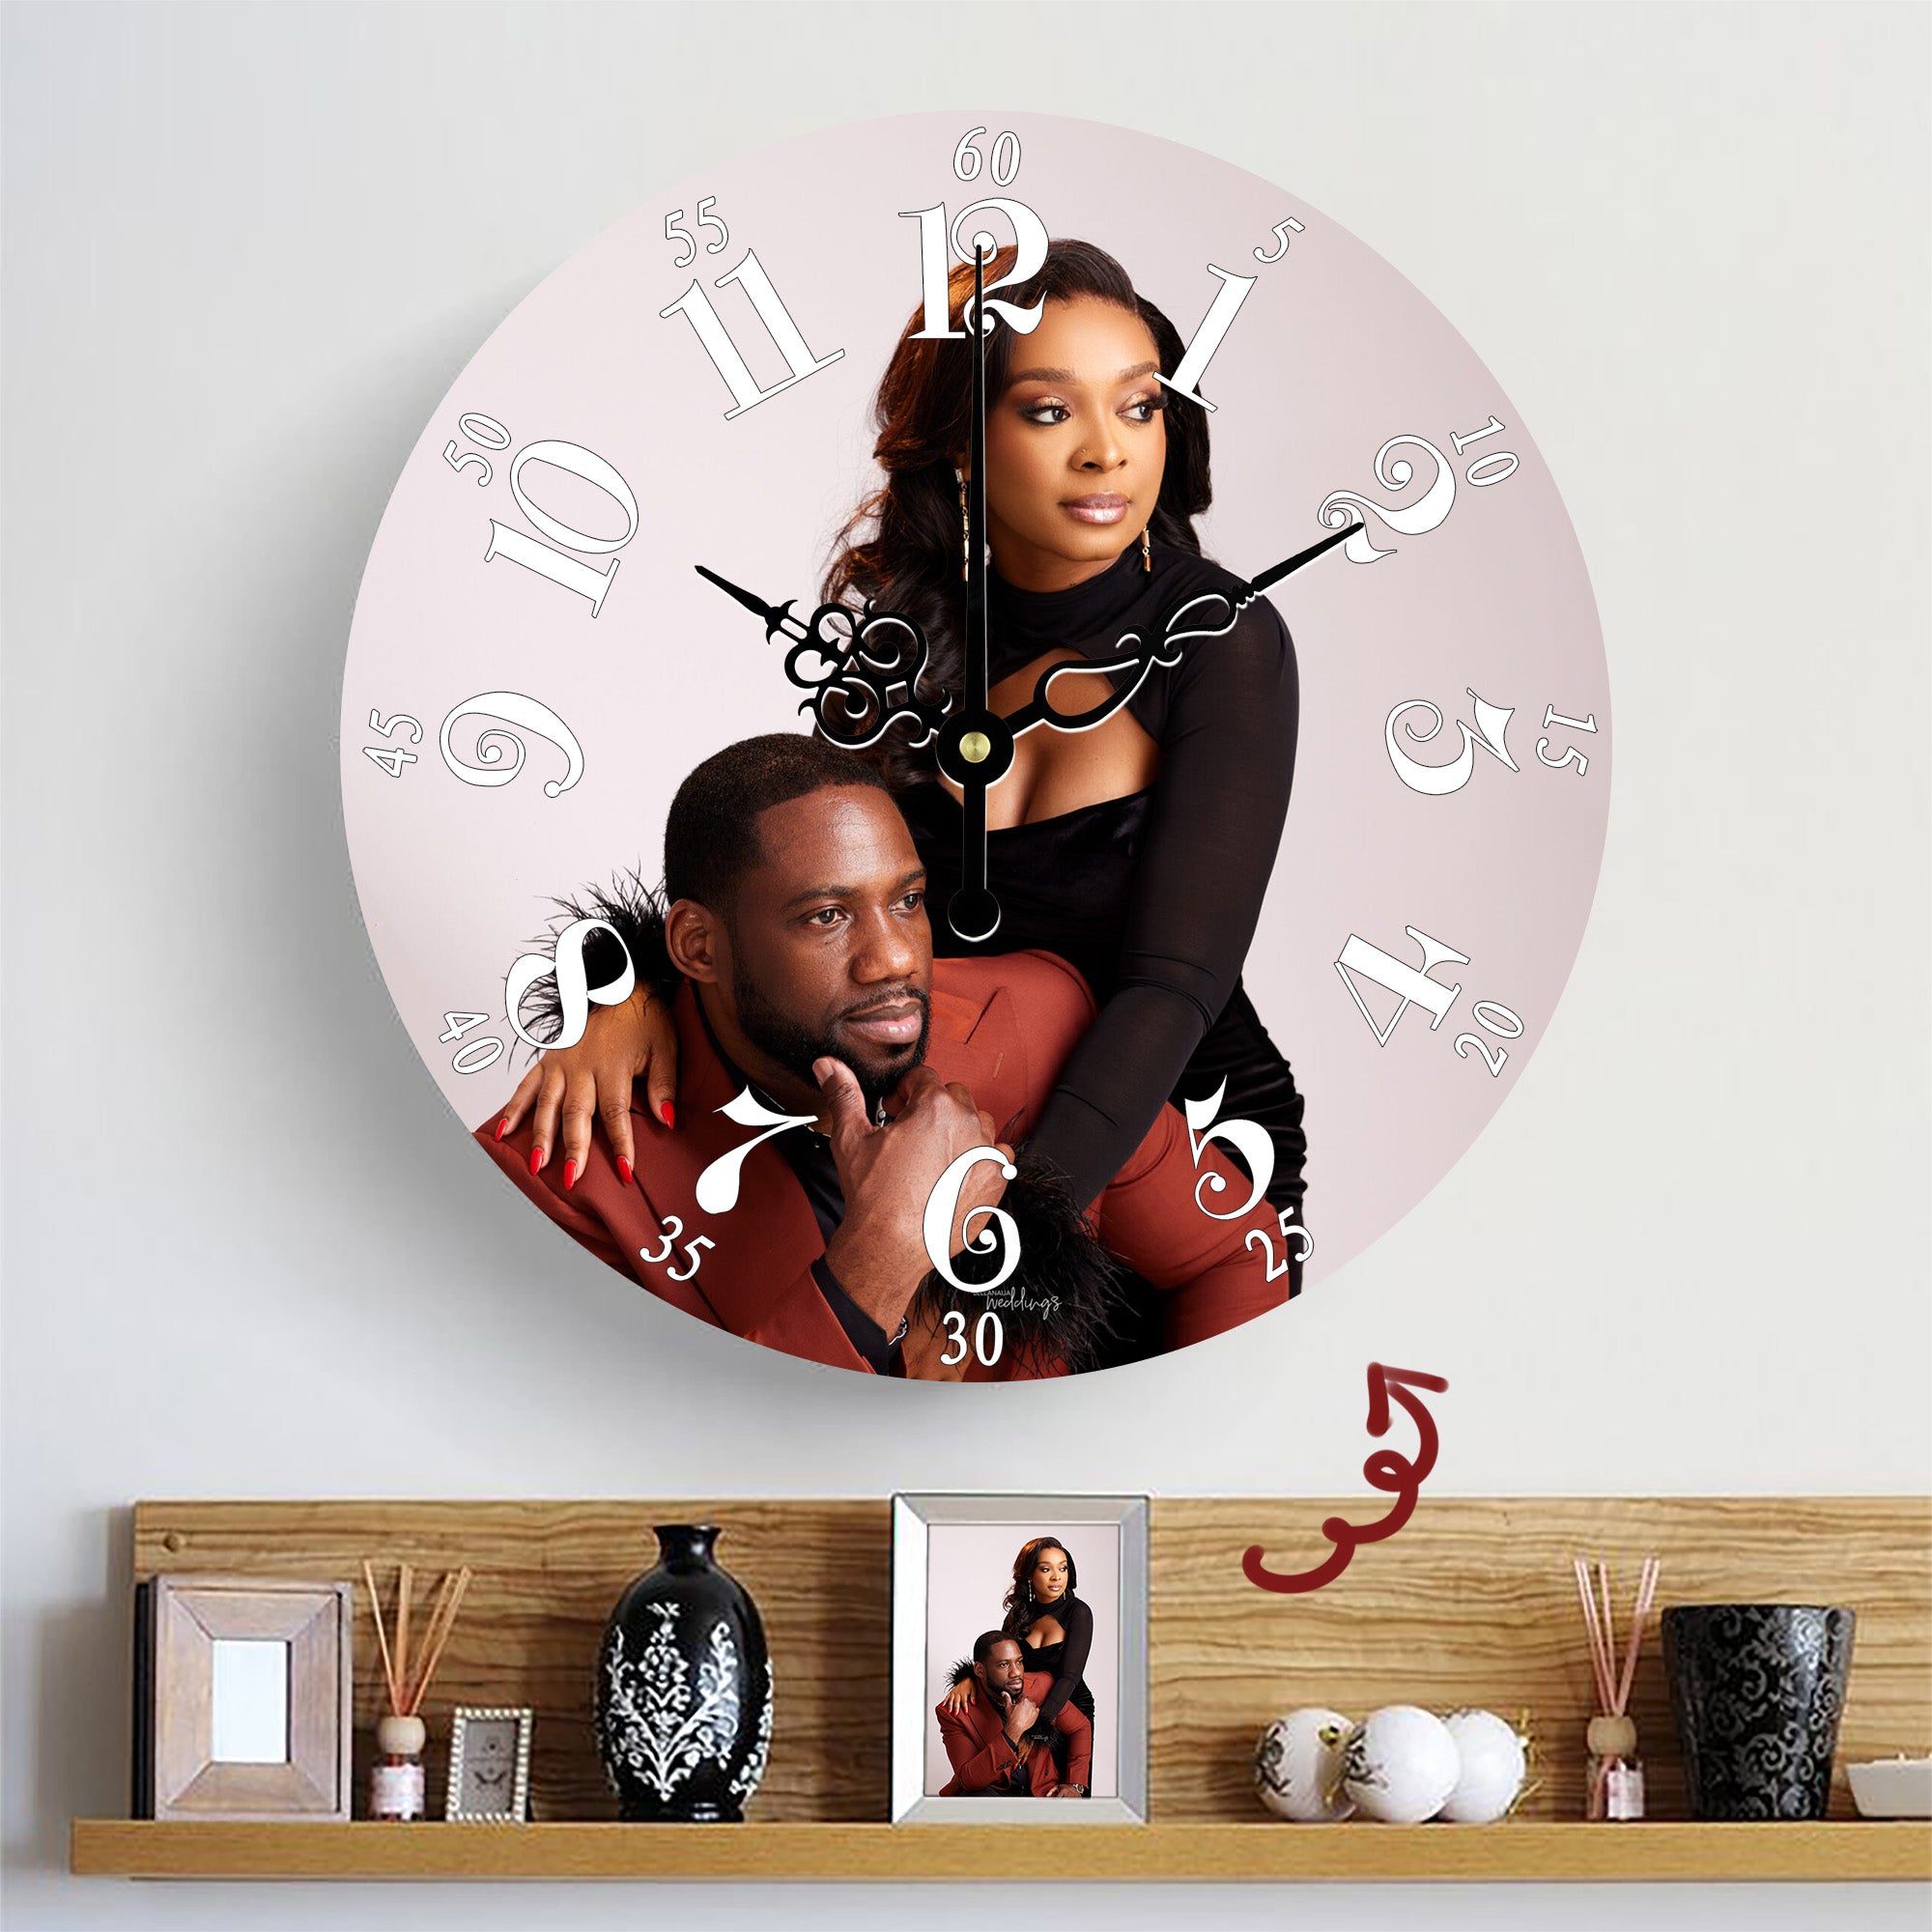 Personalized Wall Clock - Capture Moments all Number Styles